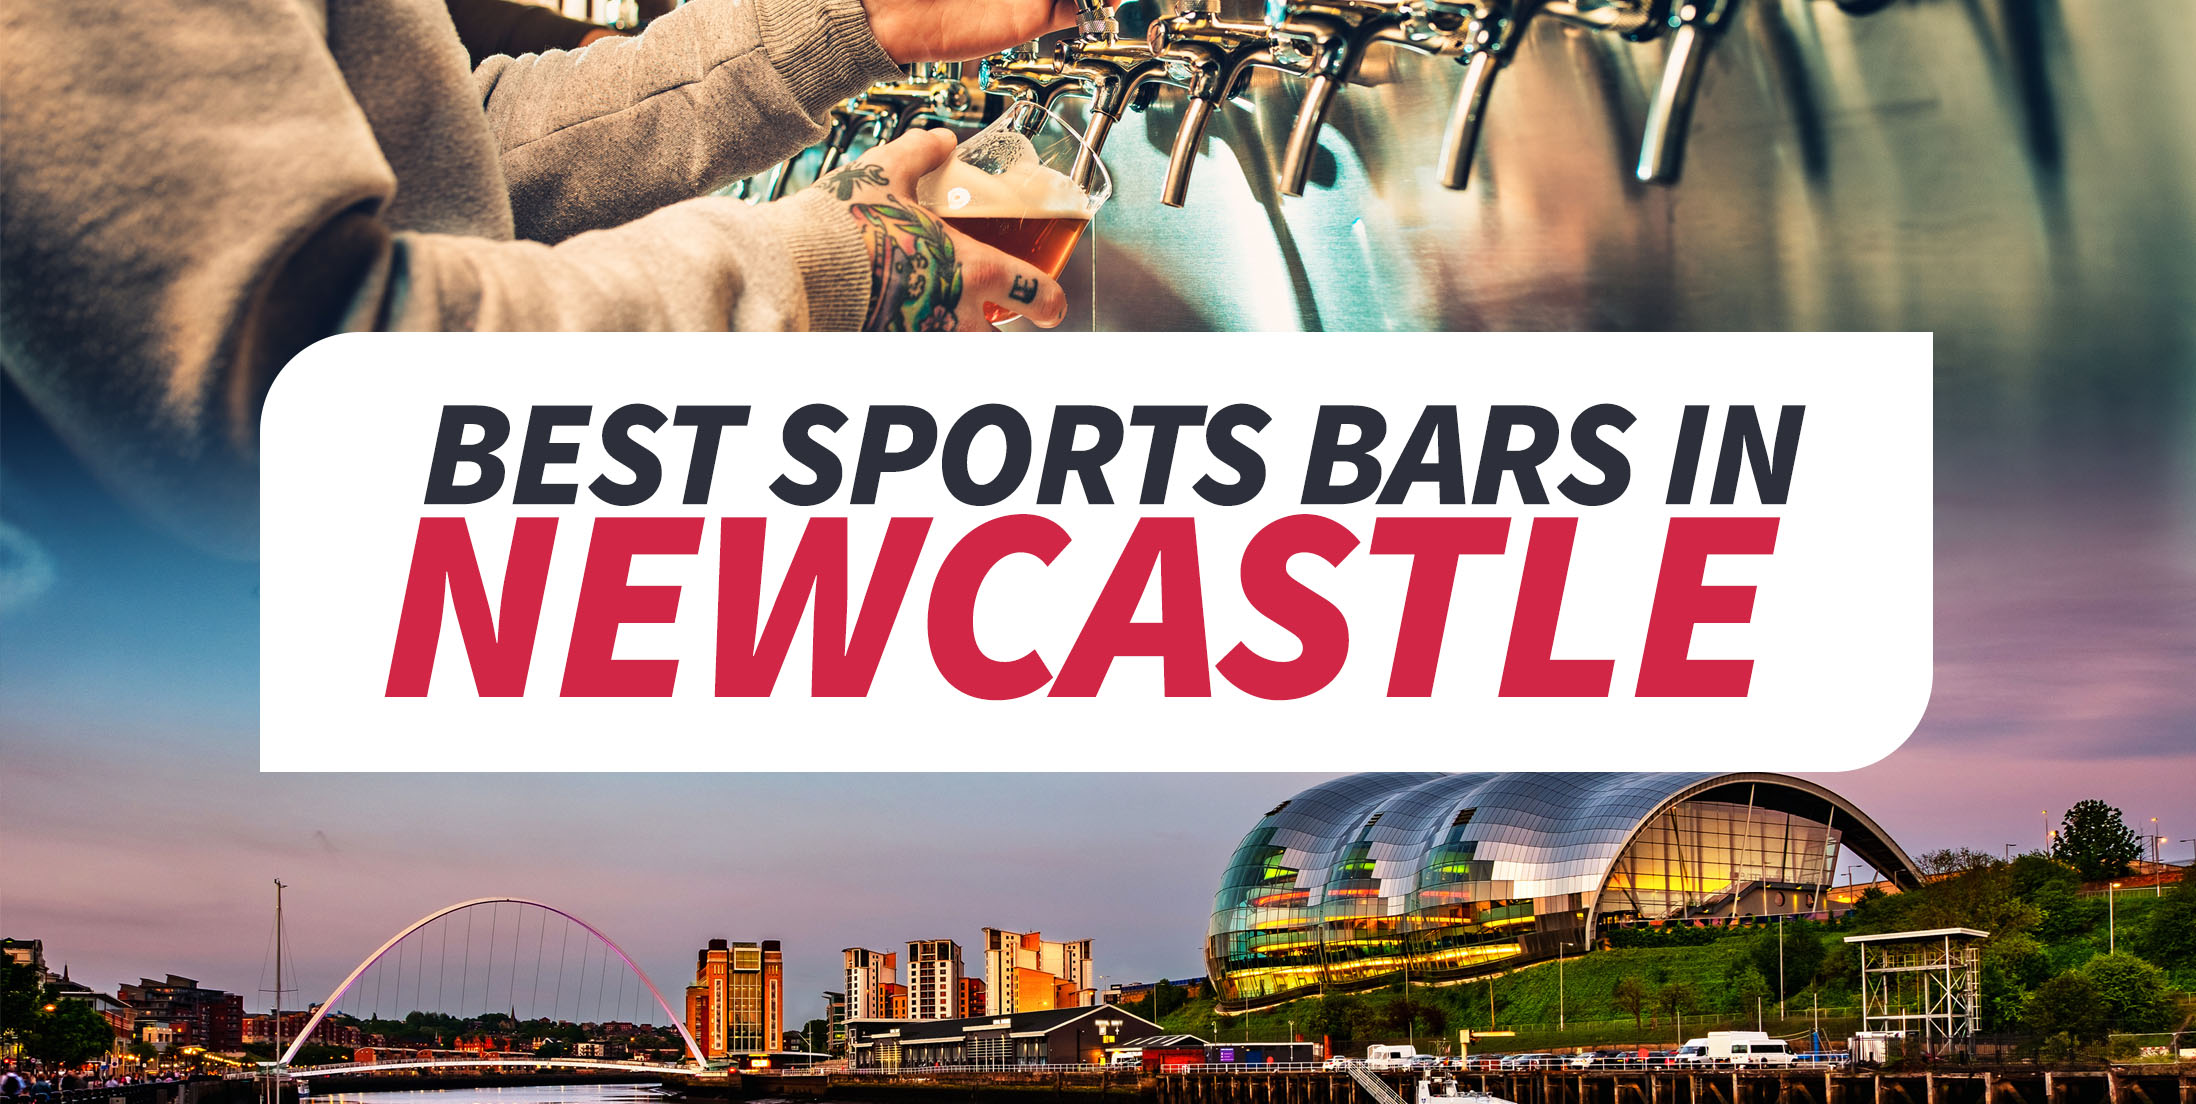 Good place is newcastle to live? a Top 6